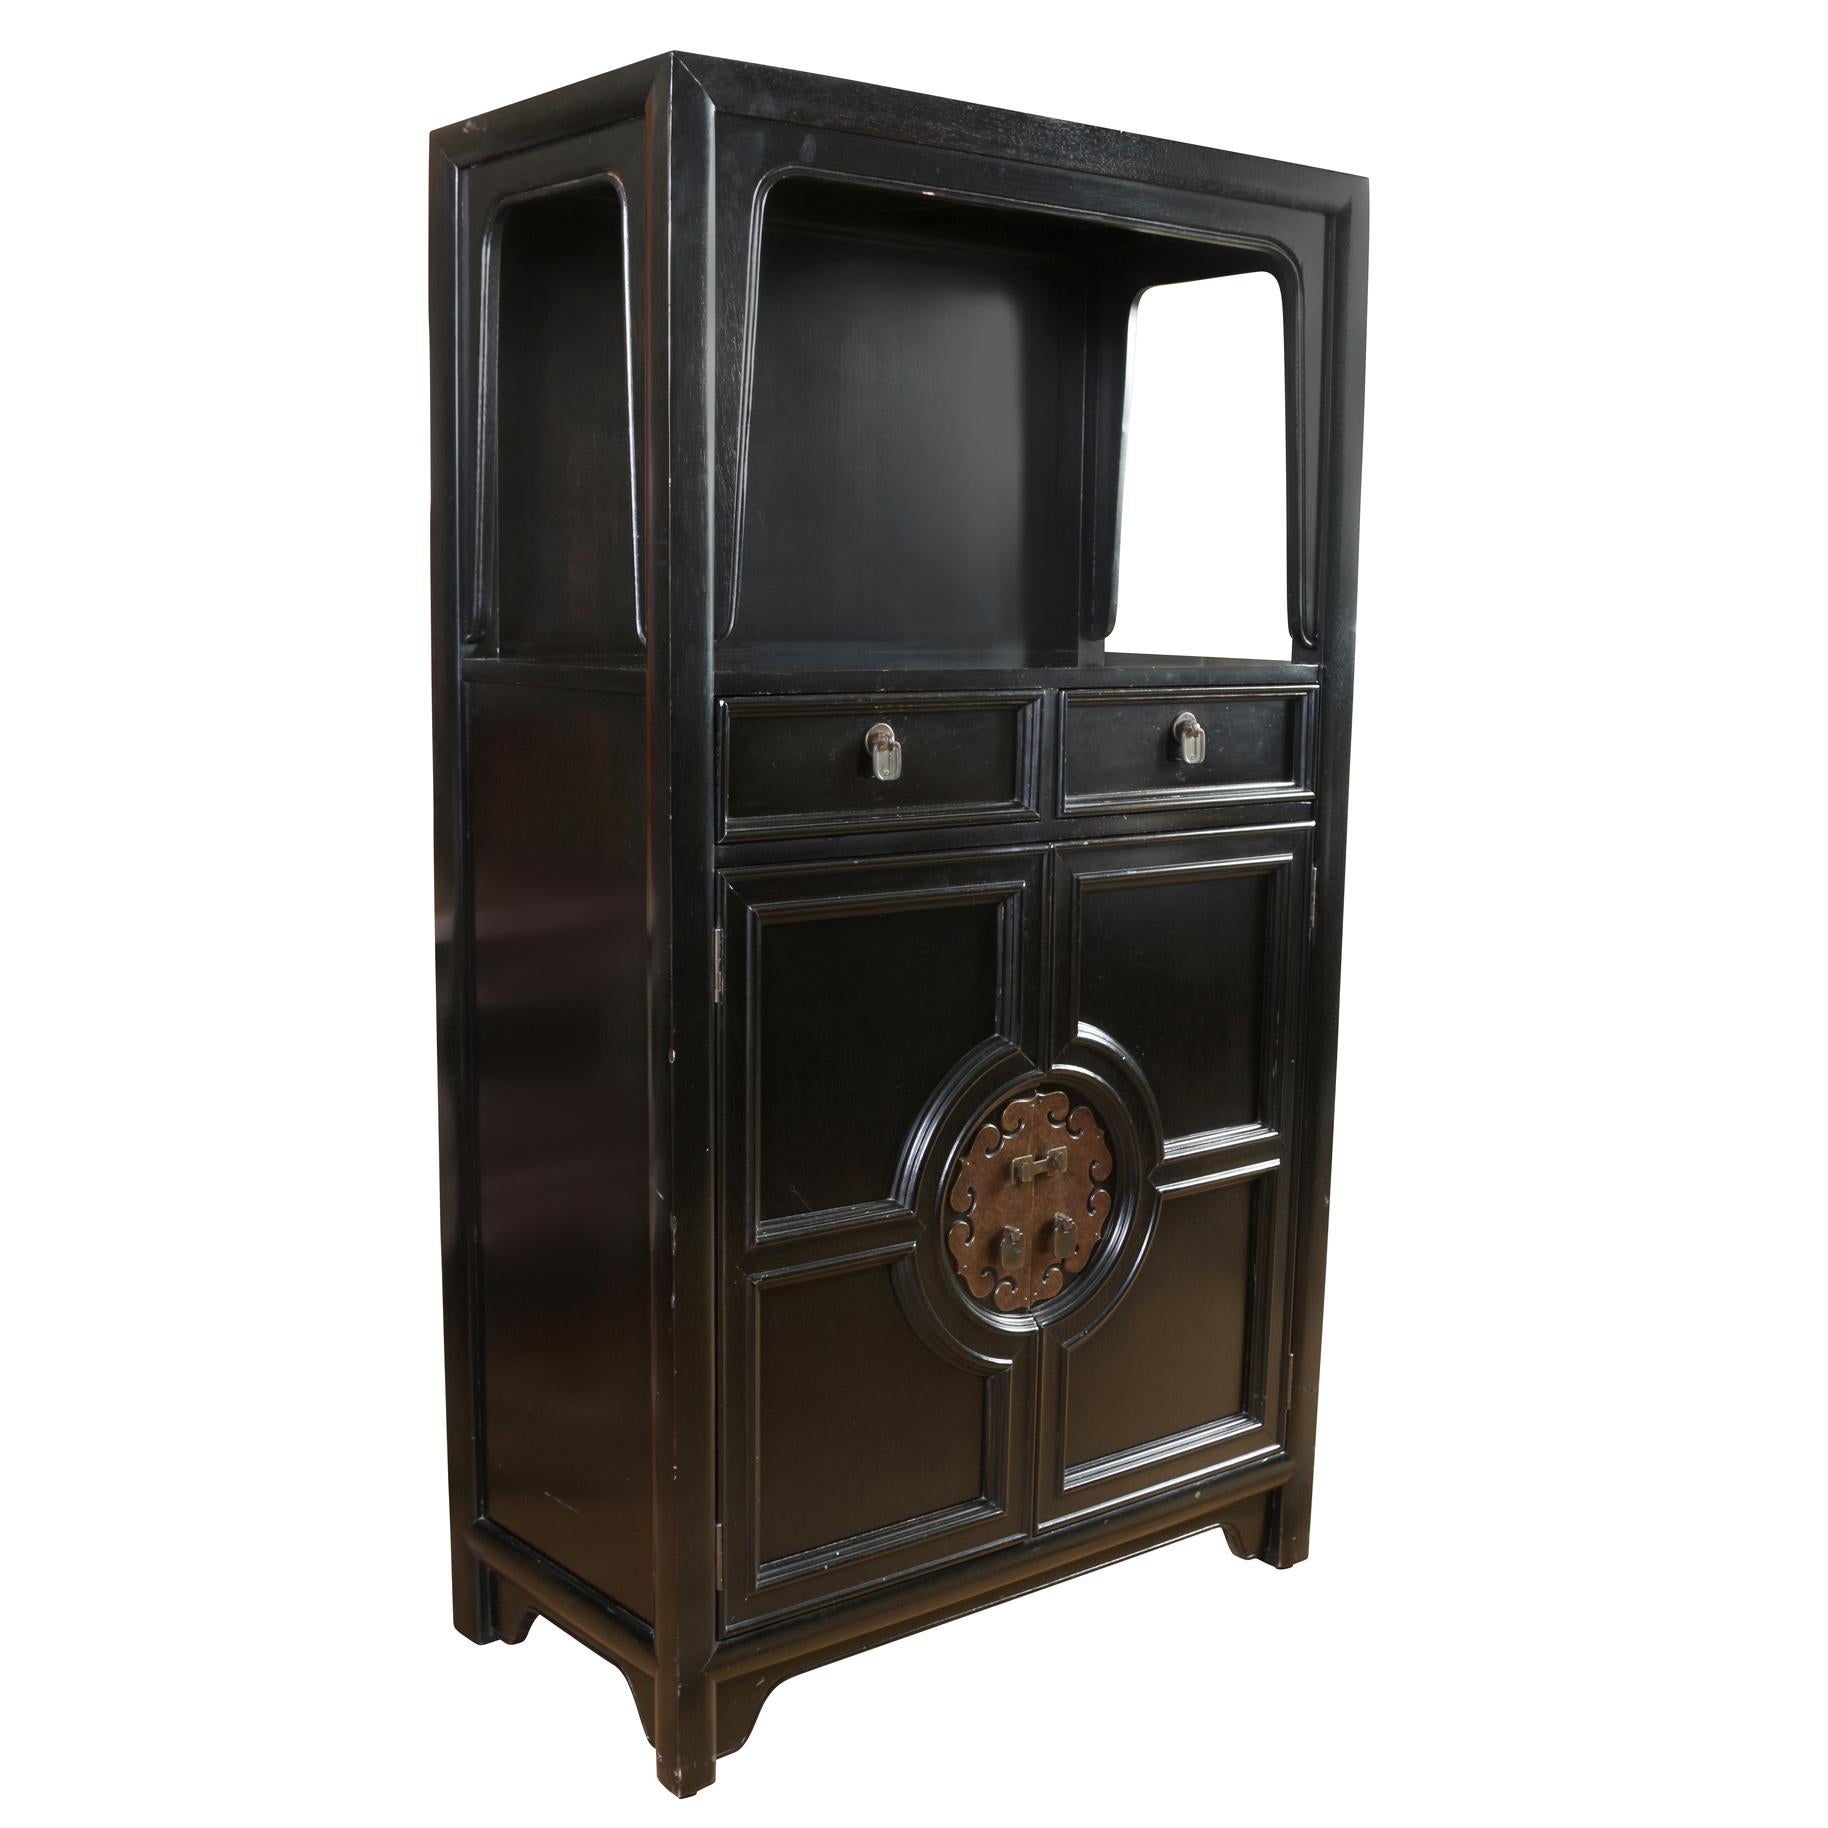 A James Mont style midcentury black wood cabinet with vintage Asian Style hardware. The cabinet has an open shelf at the top bordered by a shaped apron, two small drawers with brass hardware and then two doors at bottom that open to reveal three